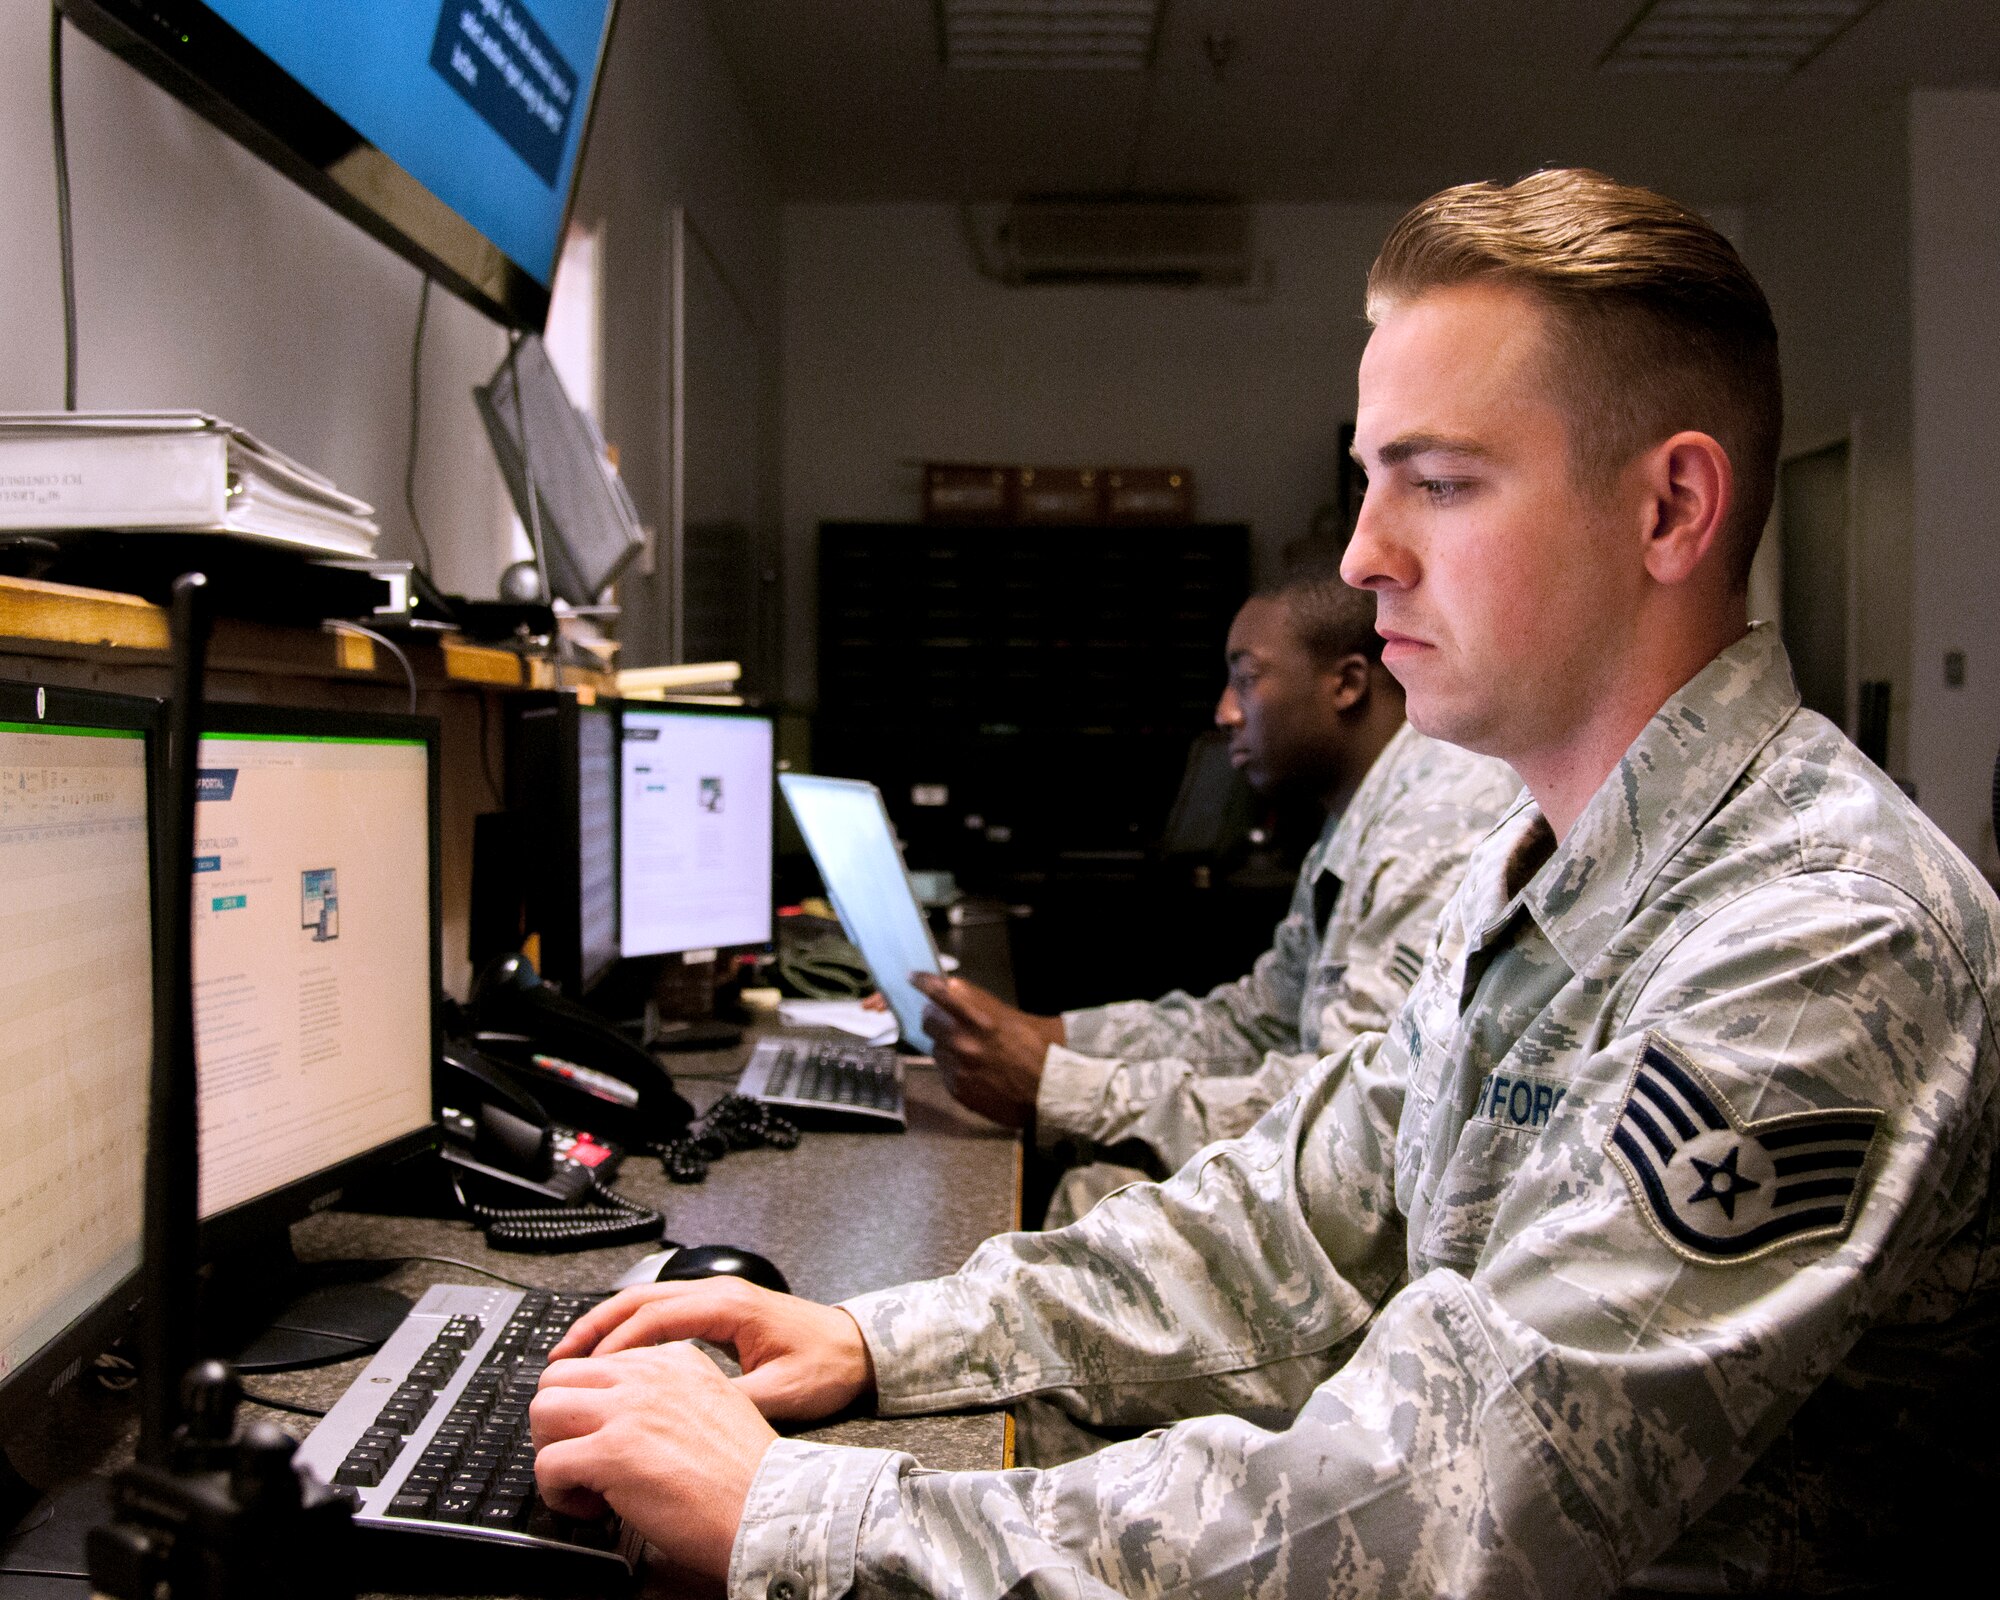 Staff Sgt. Aaron Smith and Senior Airman Joseph bates, 90th Logistics Readiness Squadron Traffic Control Function controllers, monitor computer systems, which allow them to update the 90th Missile Wing about road conditions in its missile complex, Aug. 5, 2015, on F.E. Warren Air Force Base, Wyo. TCF Airmen operate 24/7 to ensure the 90th Missile Wing has up-to-date road conditions. (U.S. Air Force photo by Senior Airman Jason Wiese)